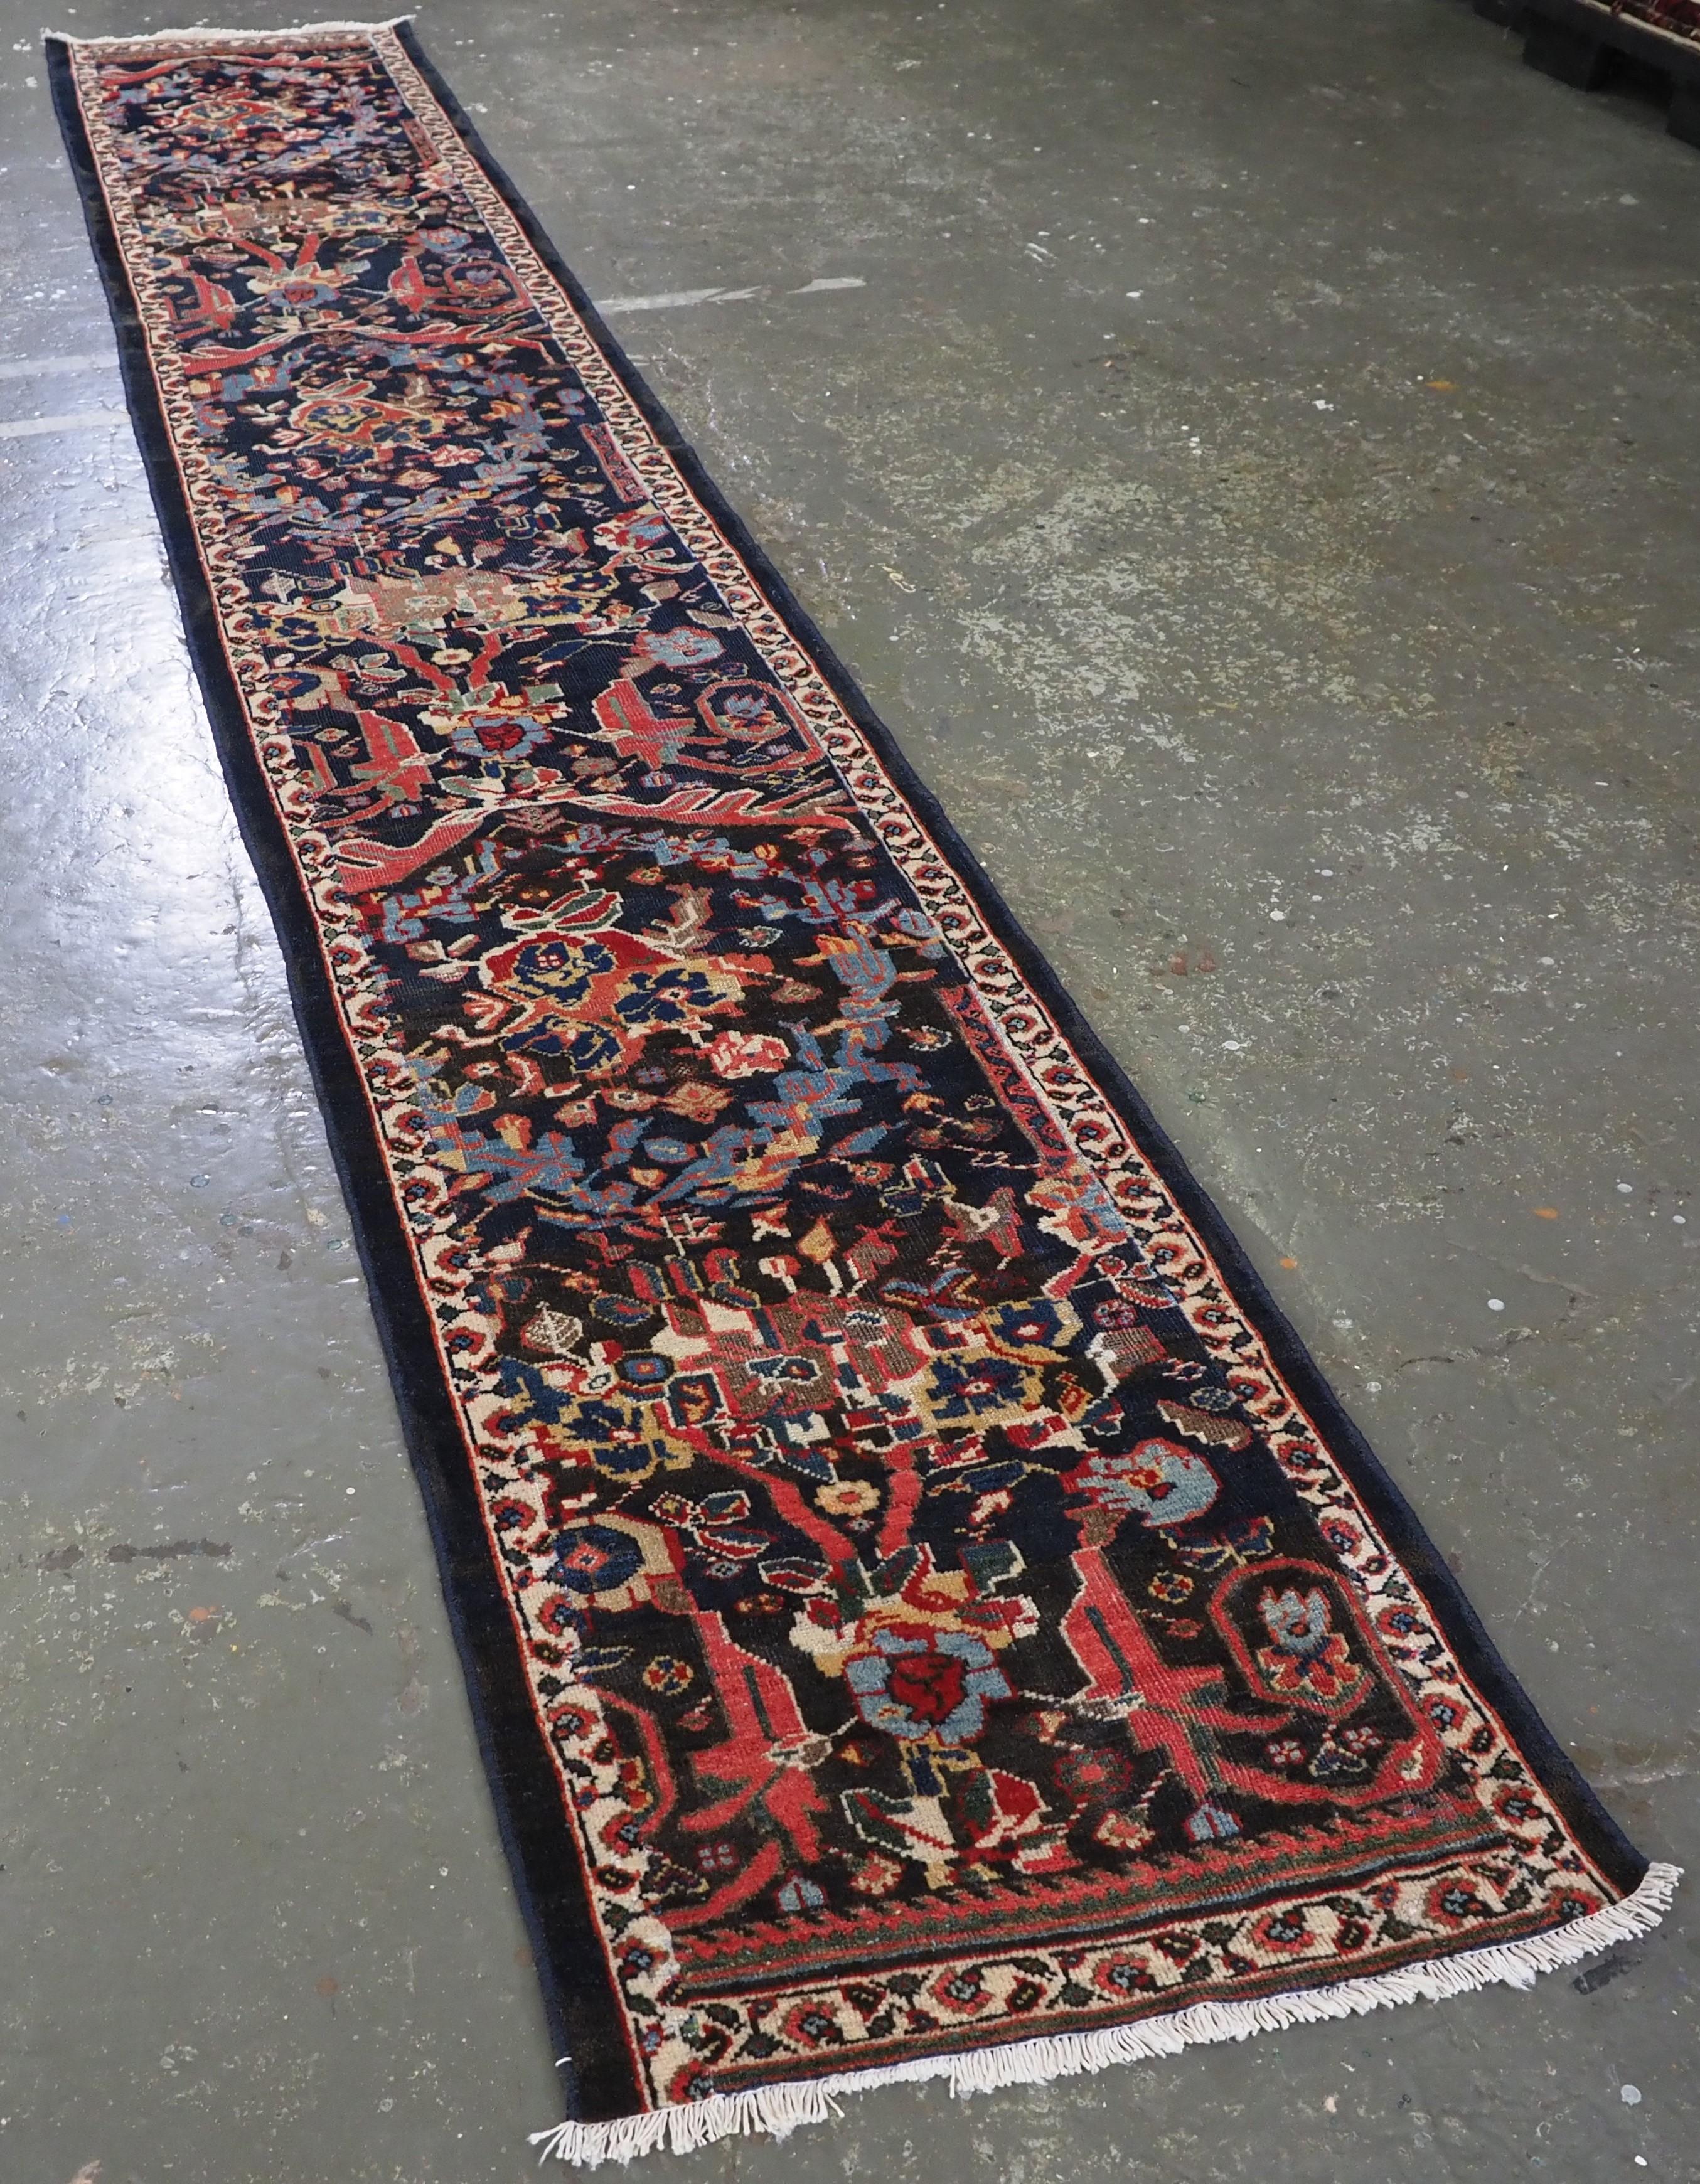 ize: 14ft 11in x 2ft 5in (455 x 73cm).

Antique Mahal runner of a very scarce narrow width.

Circa 1900.

The runner has a colourful feel with a classic large scale floral design on a dark indigo blue ground. The narrow ivory border frames the